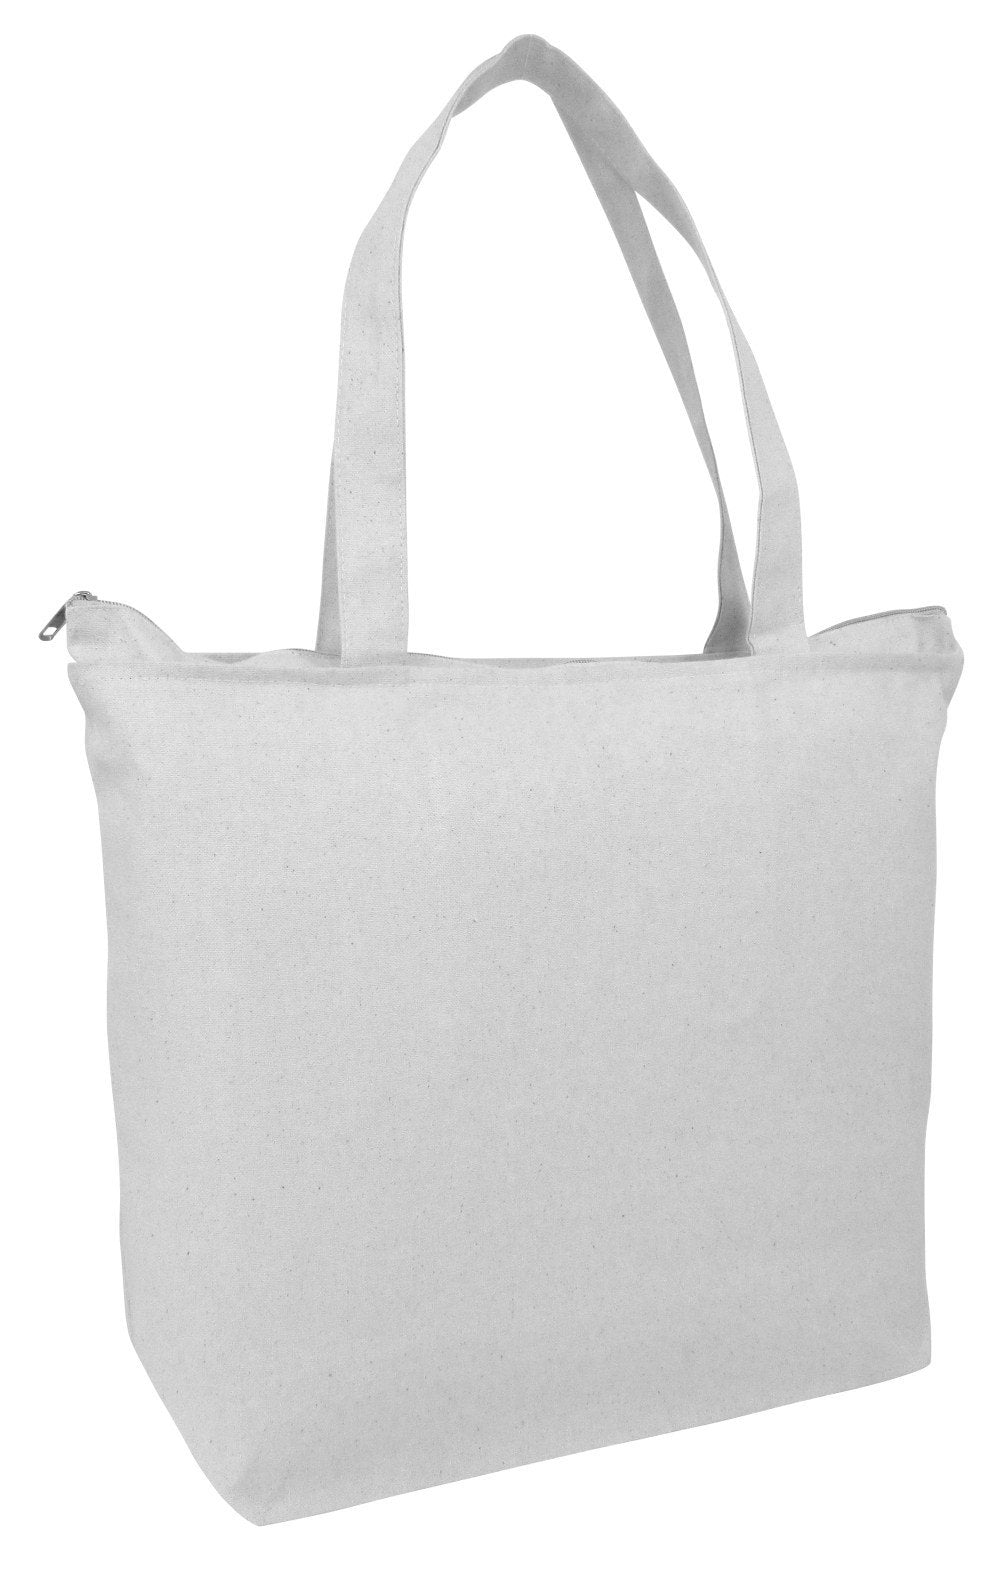 https://totebagfactory.com/cdn/shop/products/Whiteeco-friendly-cotton-canvas-large-zippered-shopping-beach-tote-bag-sturdy-gusset.jpg?v=1597961963&width=1214